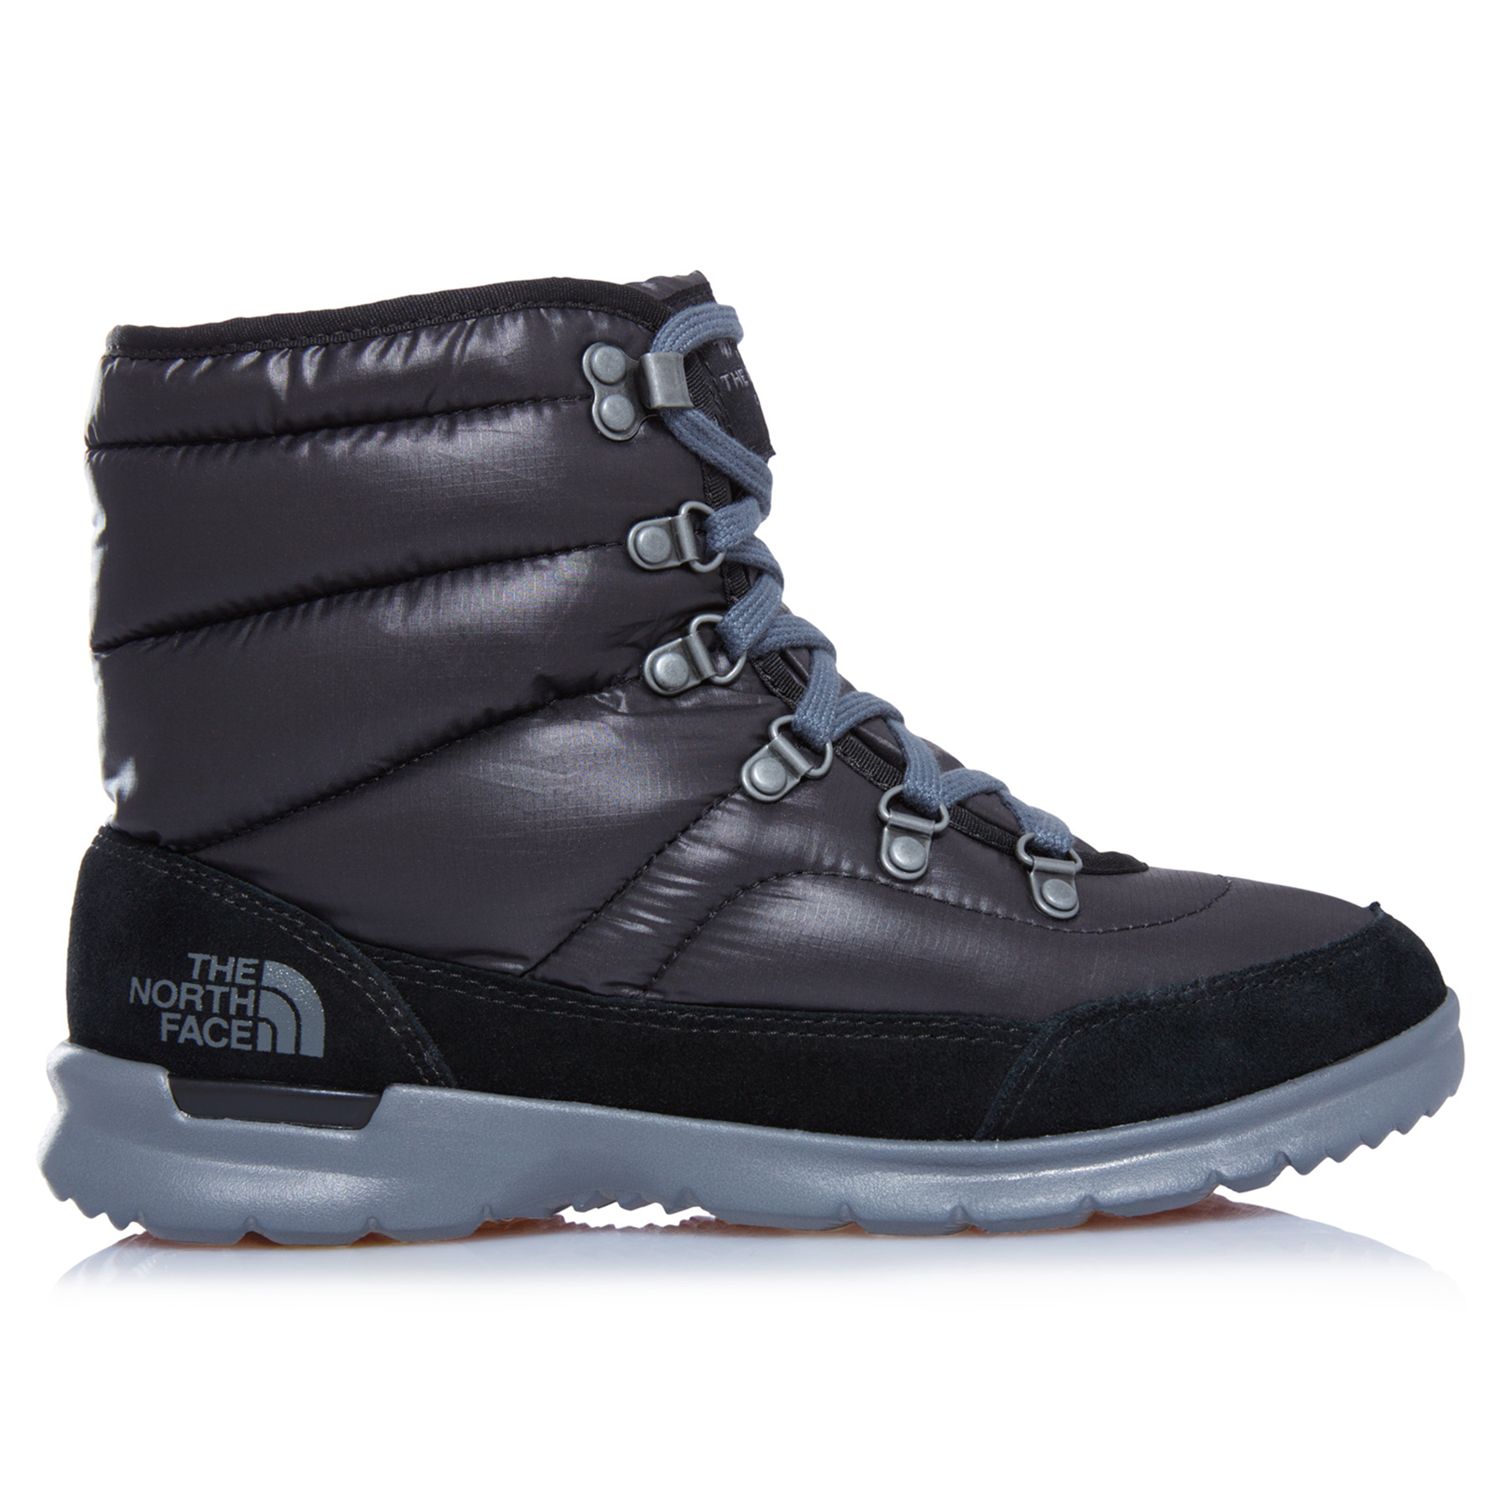 thermoball north face boots